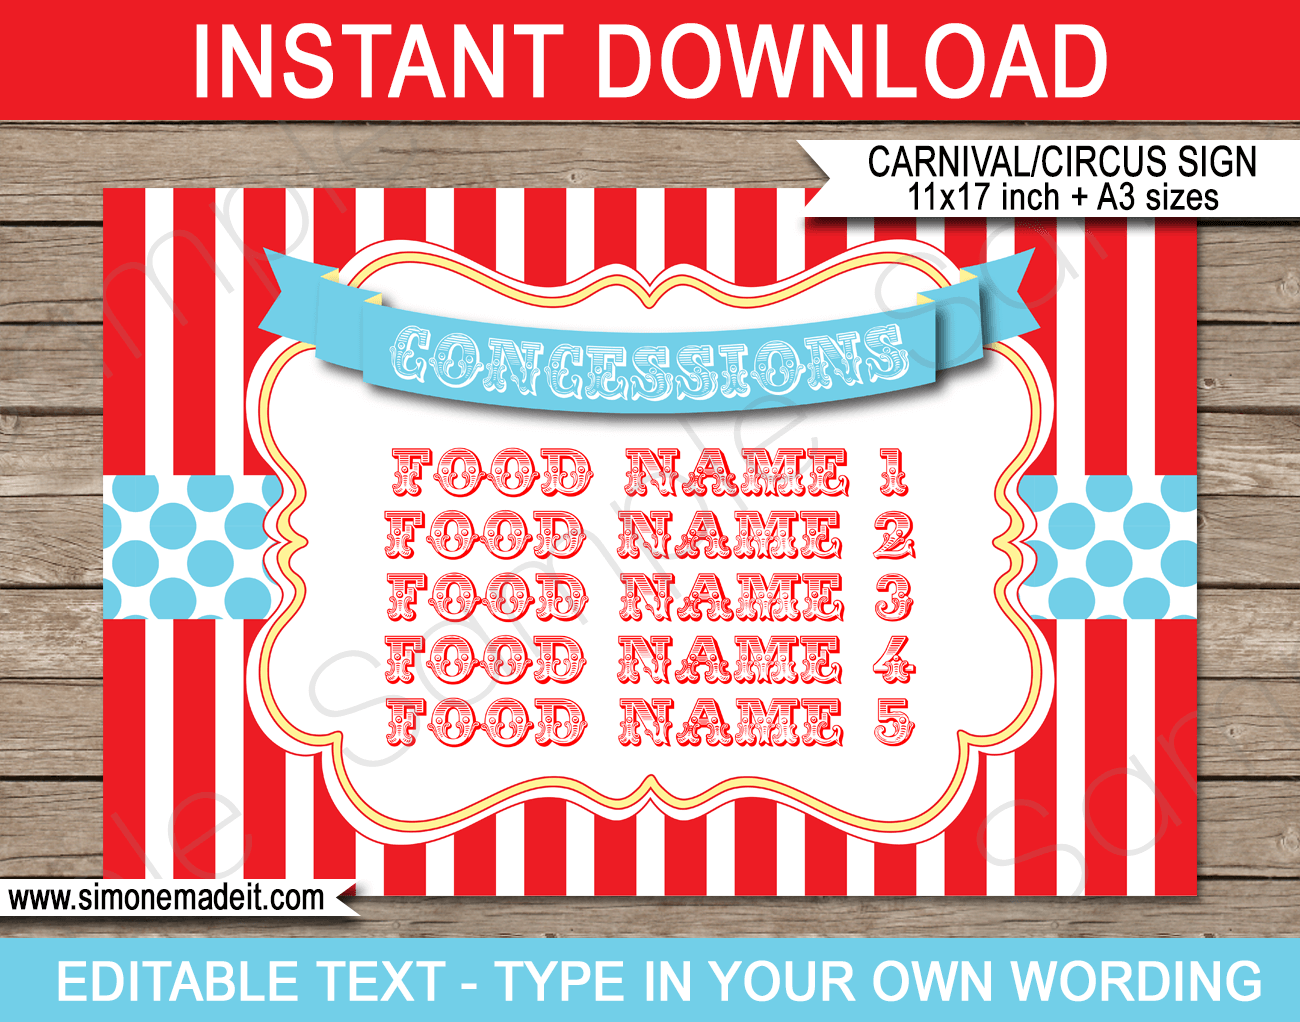 Printable Circus Concessions Signs | Editable Text DIY Template | Carnival Theme Party Decorations | $4.00 Instant Download via SIMONEmadeit.com